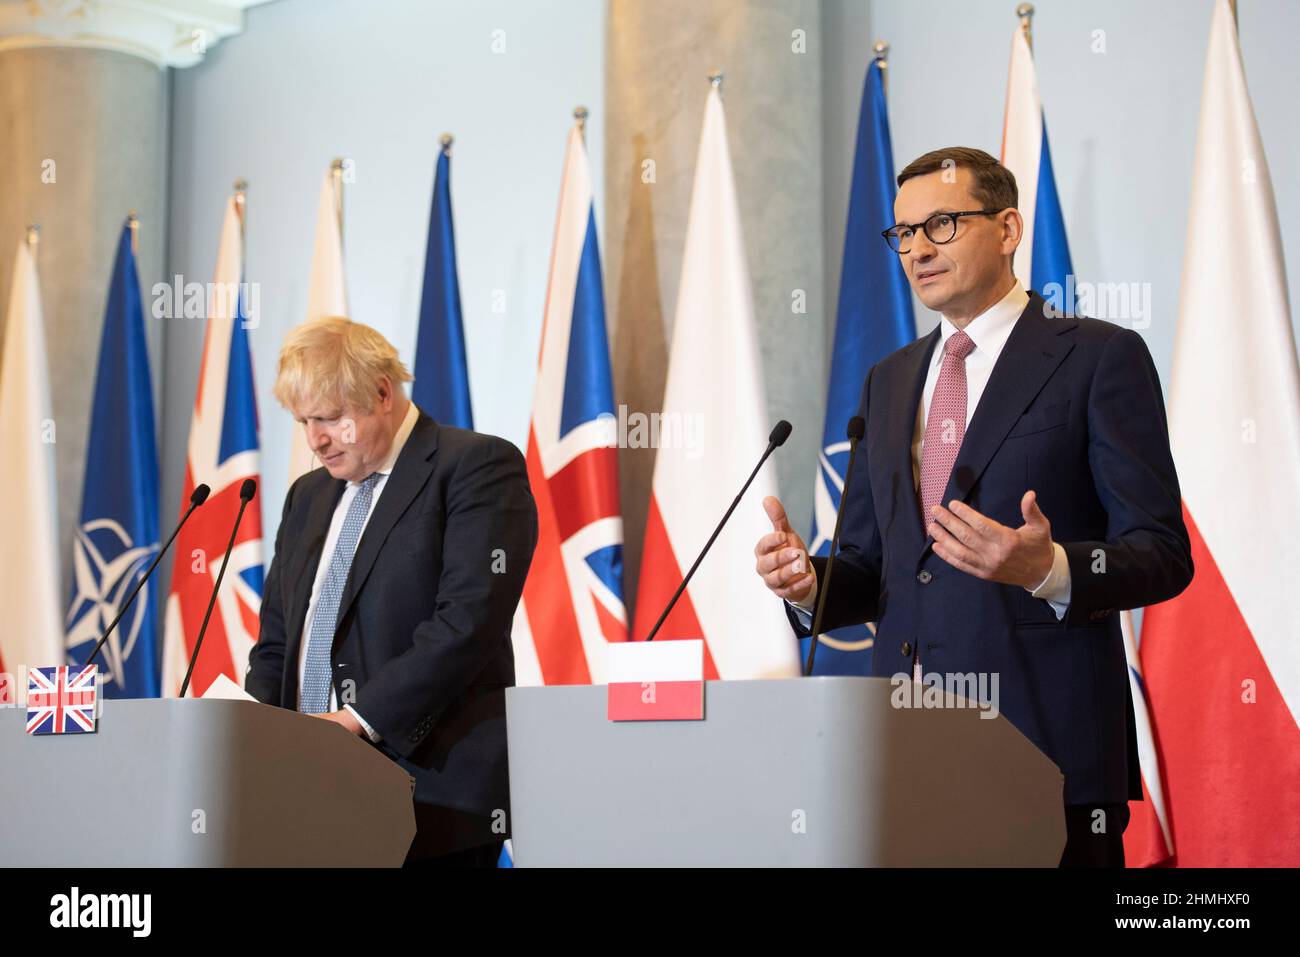 Warsaw, Warsaw, Poland. 10th Feb, 2022. Polish Prime Minister MATEUSZ MORAWIECKI (R) and Prime Minister of Britain BORIS JOHNSON (L) give a press conference at the chancellery of the Prime Minister on February 10, 2022 in Warsaw, Poland. The British Prime Minister Borish Johnson met Polish Prime Minister Mateusz Morawiecki to discuss about security in eastern Europe and Russian military build up on the border with Ukraine.) welcomes the Prime Minister of Britain BORIS JOHNSON (R) at the chancellery of the PM ahead of talks. Credit: ZUMA Press, Inc./Alamy Live News Stock Photo